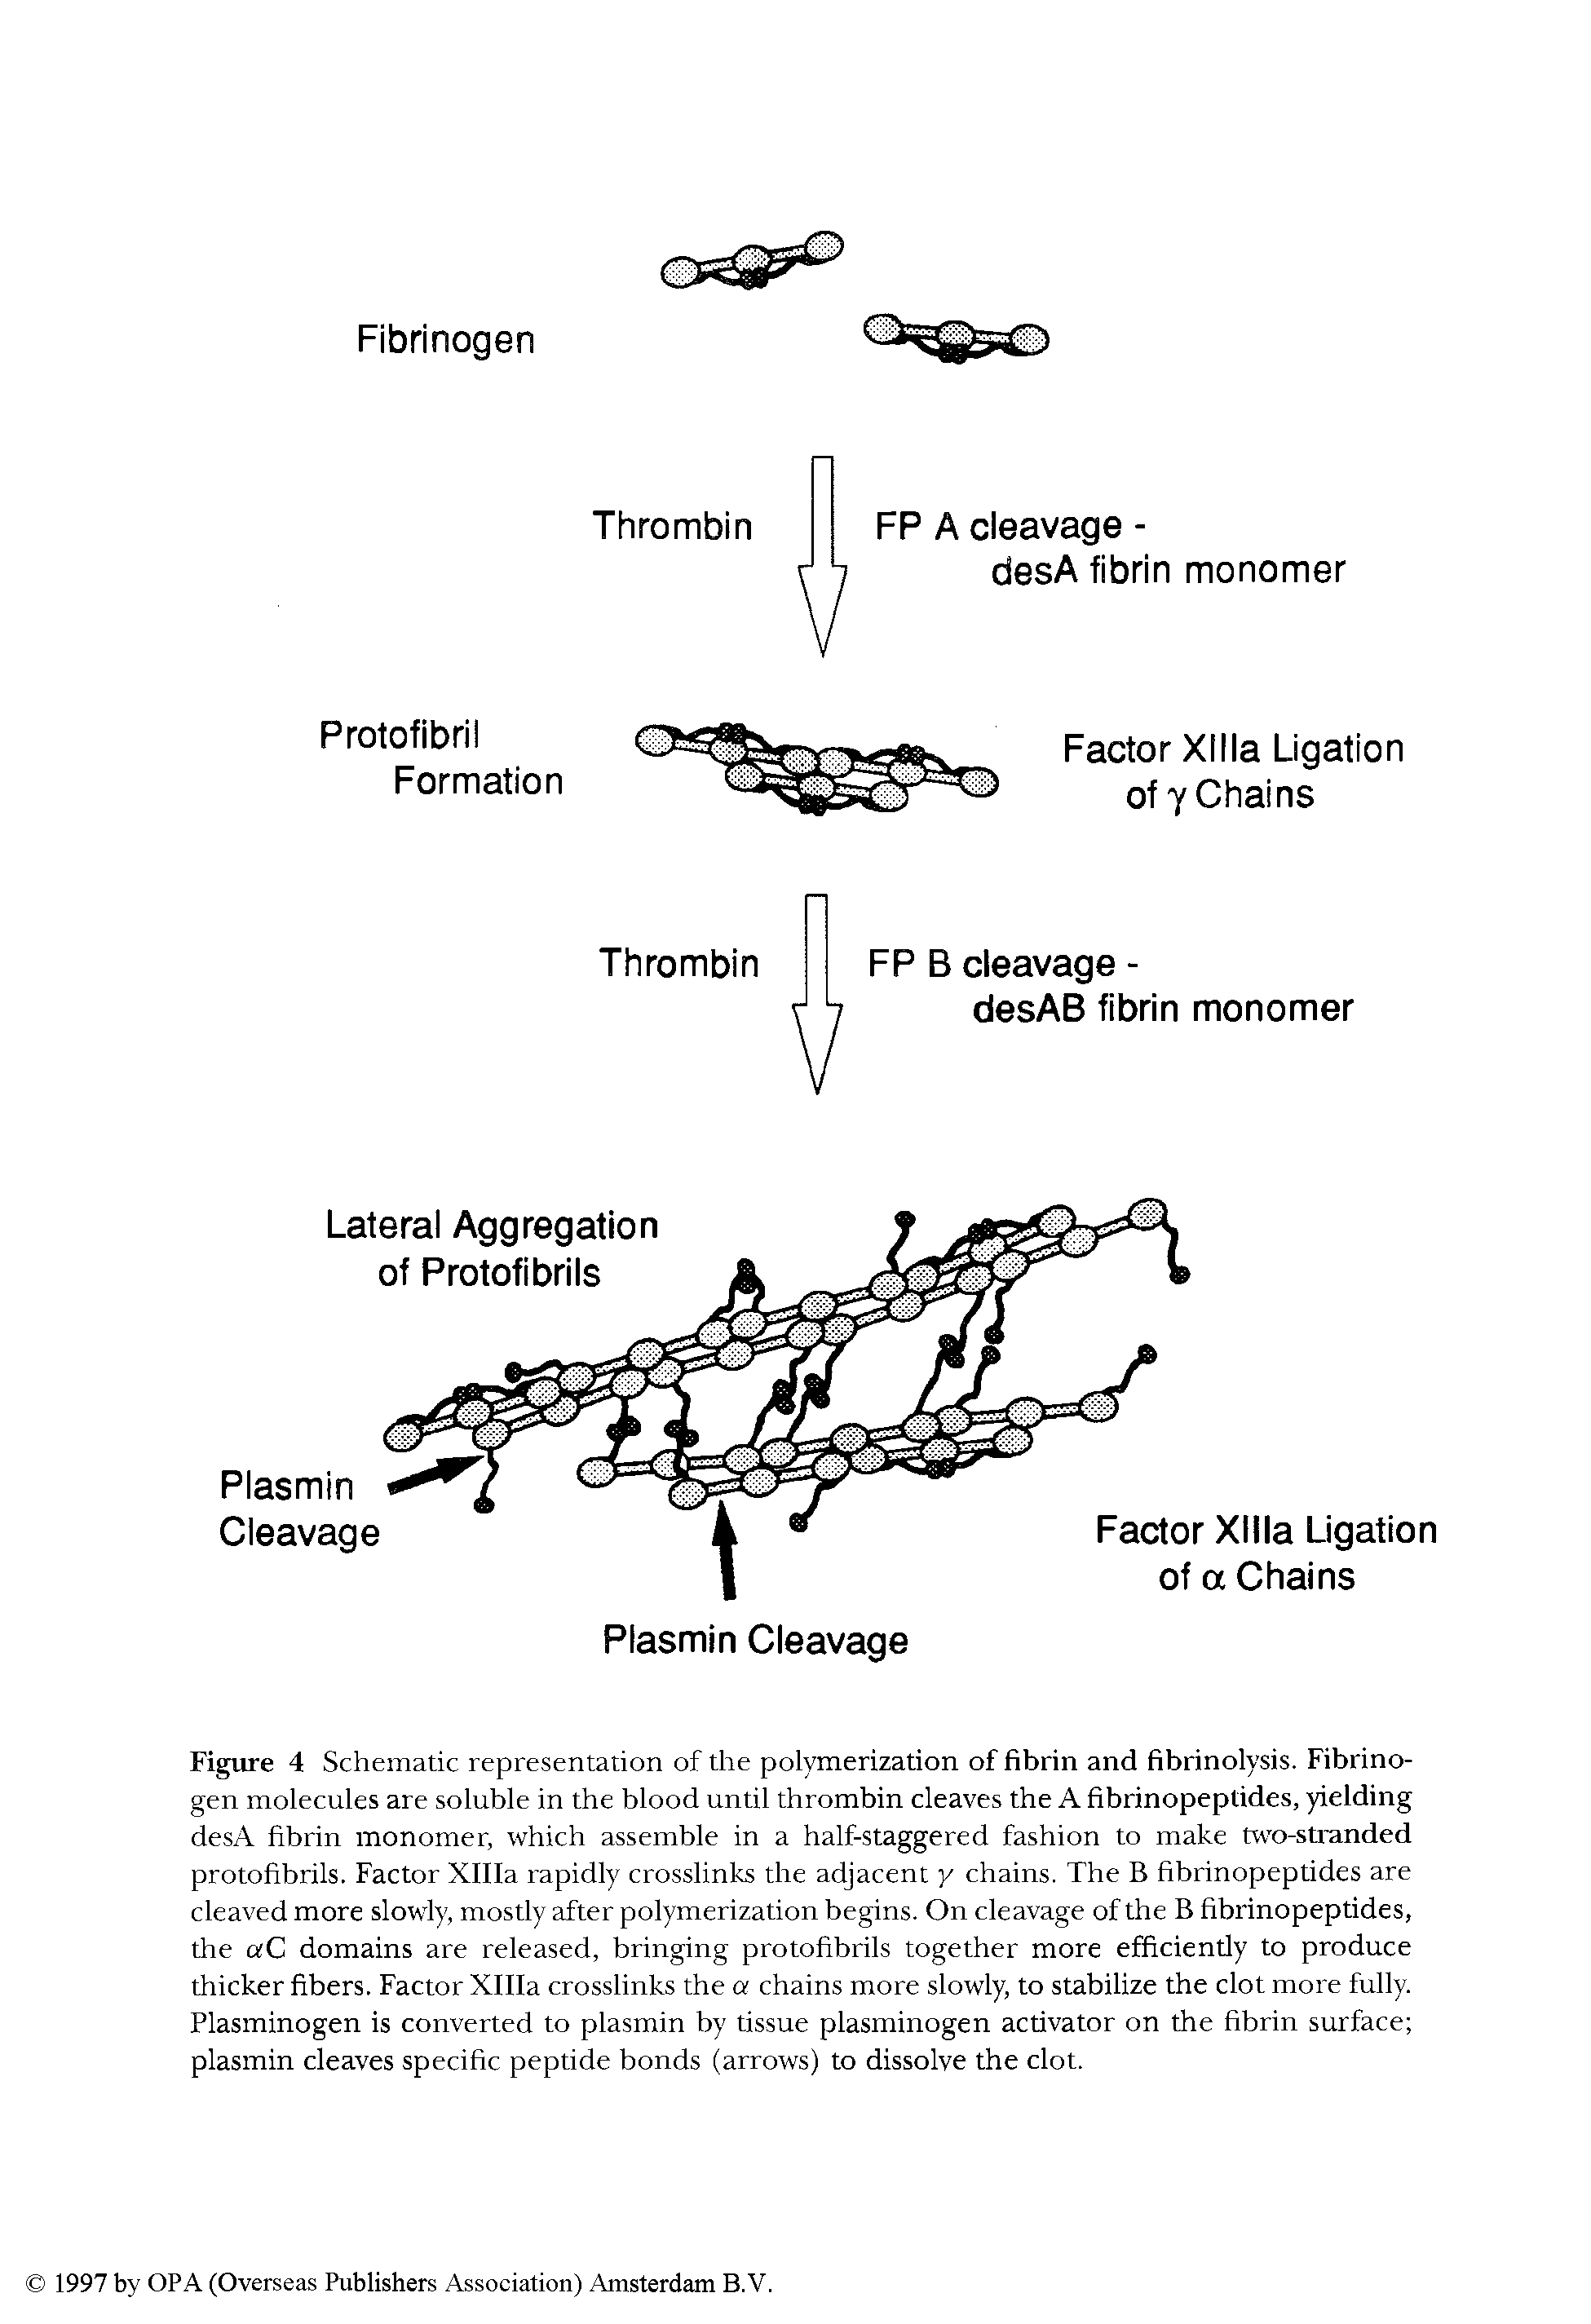 Figure 4 Schematic representation of the polymerization of fibrin and fibrinolysis. Fibrinogen molecules are soluble in the blood until thrombin cleaves the A fibrinopeptides, yielding desA fibrin monomer, which assemble in a half-staggered fashion to make two-stranded protofibrils. Factor Xllla rapidly crosslinks the adjacent y chains. The B fibrinopeptides are cleaved more slowly mosdy after polymerization begins. On cleavage of the B fibrinopeptides, the aC domains are released, bringing protofibrils together more efficiendy to produce thicker fibers. Factor Xllla crosslinks the a chains more slowly, to stabilize the clot more fully. Plasminogen is converted to plasmin by tissue plasminogen activator on the fibrin surface plasmin cleaves specific peptide bonds (arrows) to dissolve the clot.